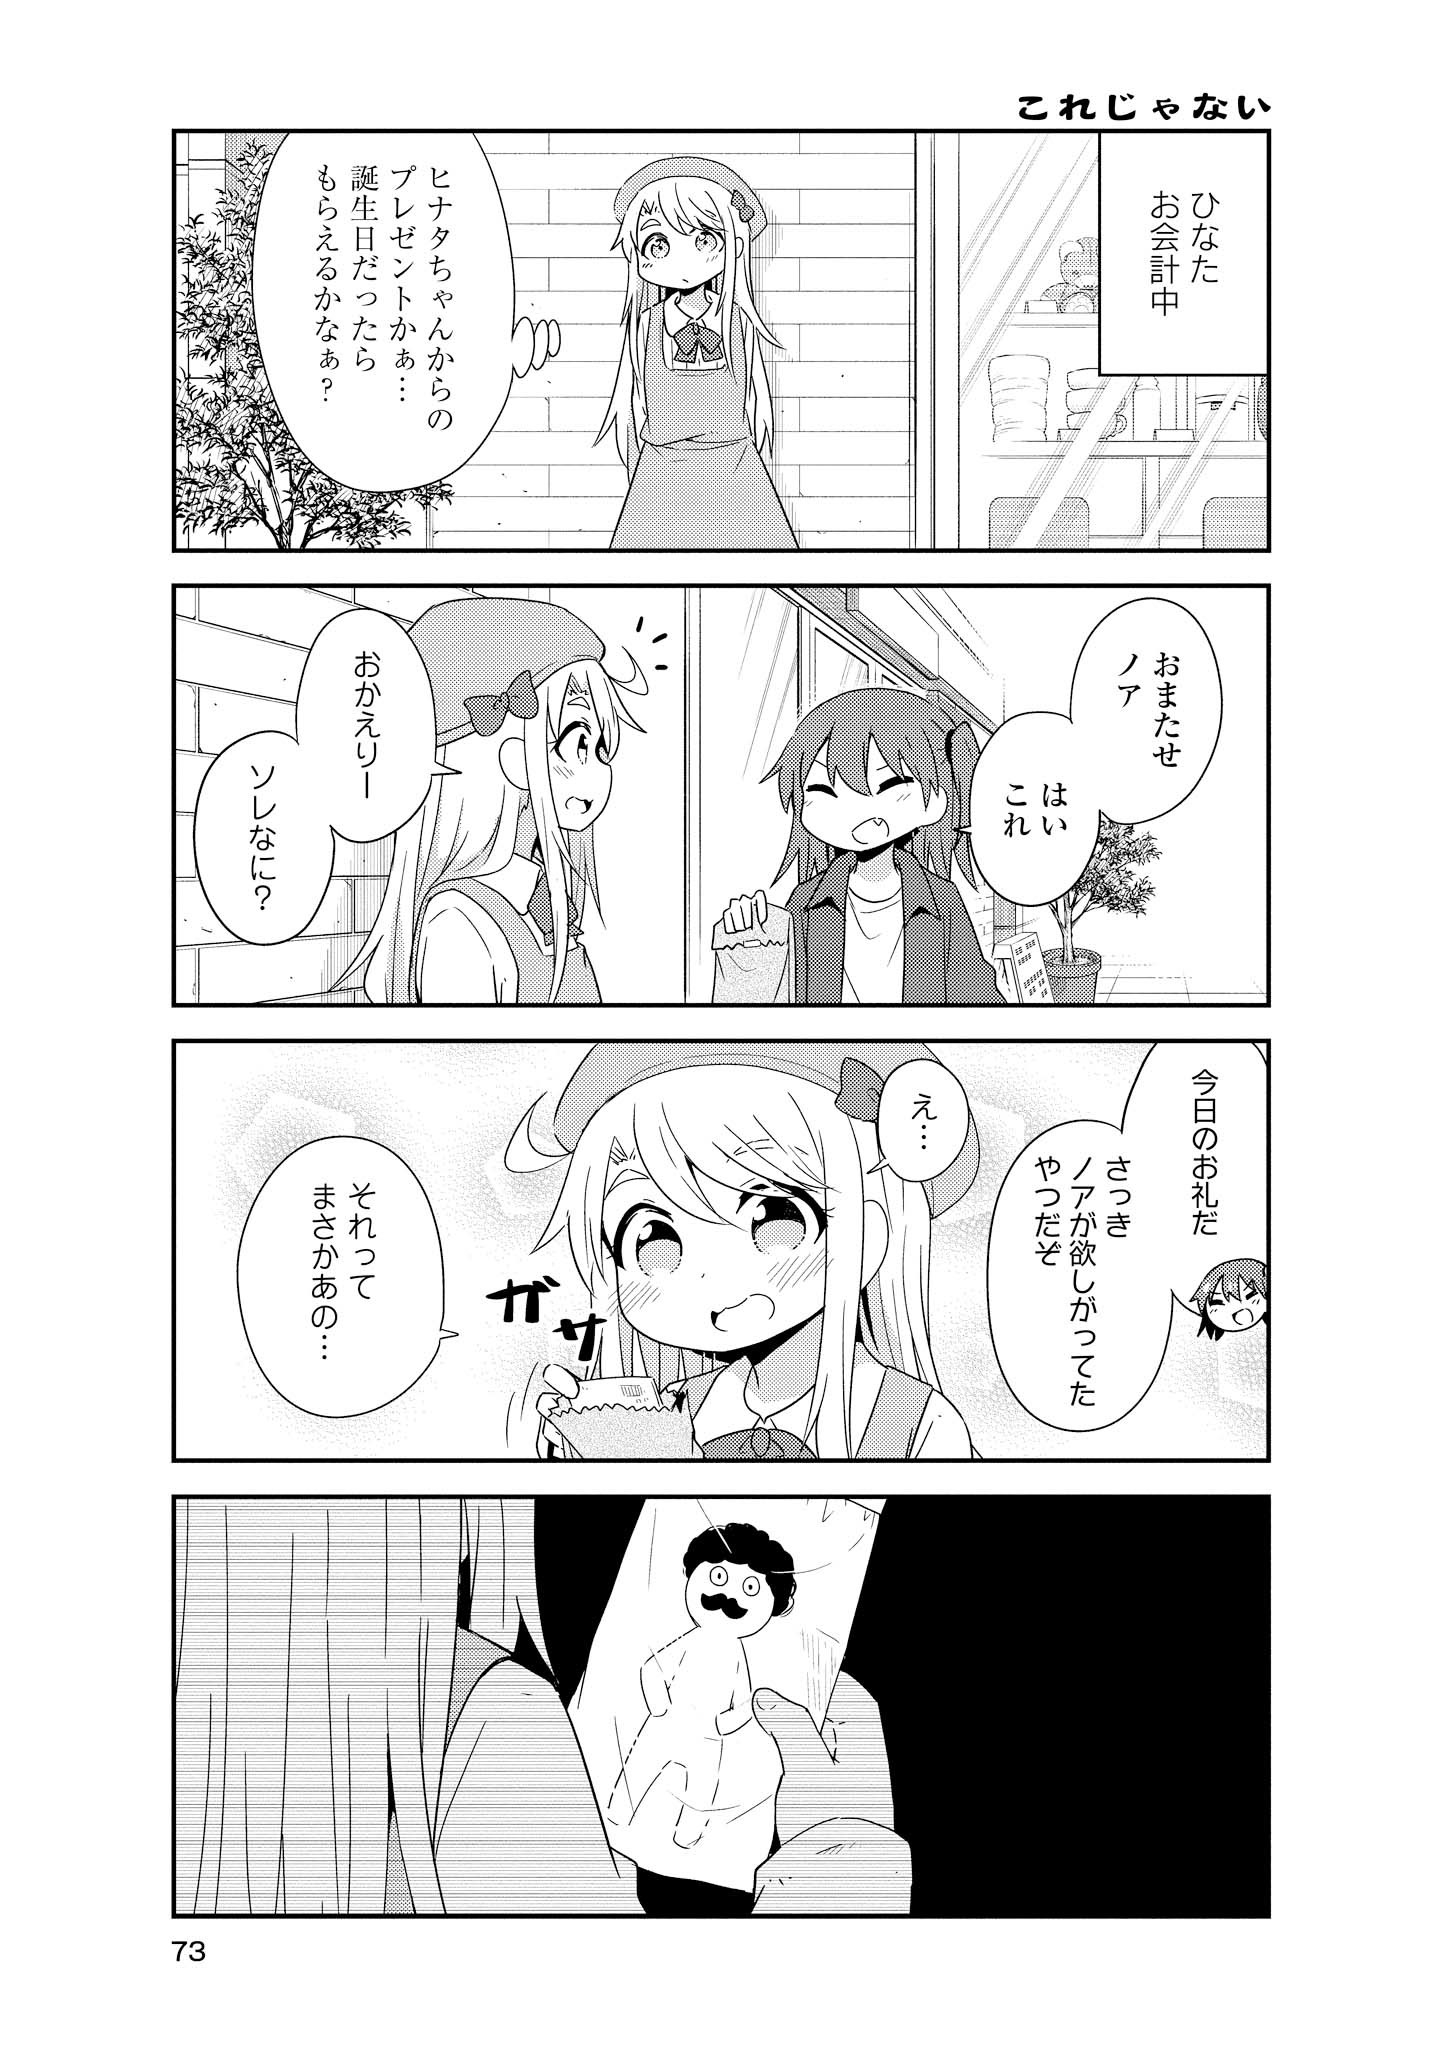 Wataten! An Angel Flew Down to Me 私に天使が舞い降りた！ 第33話 - Page 13